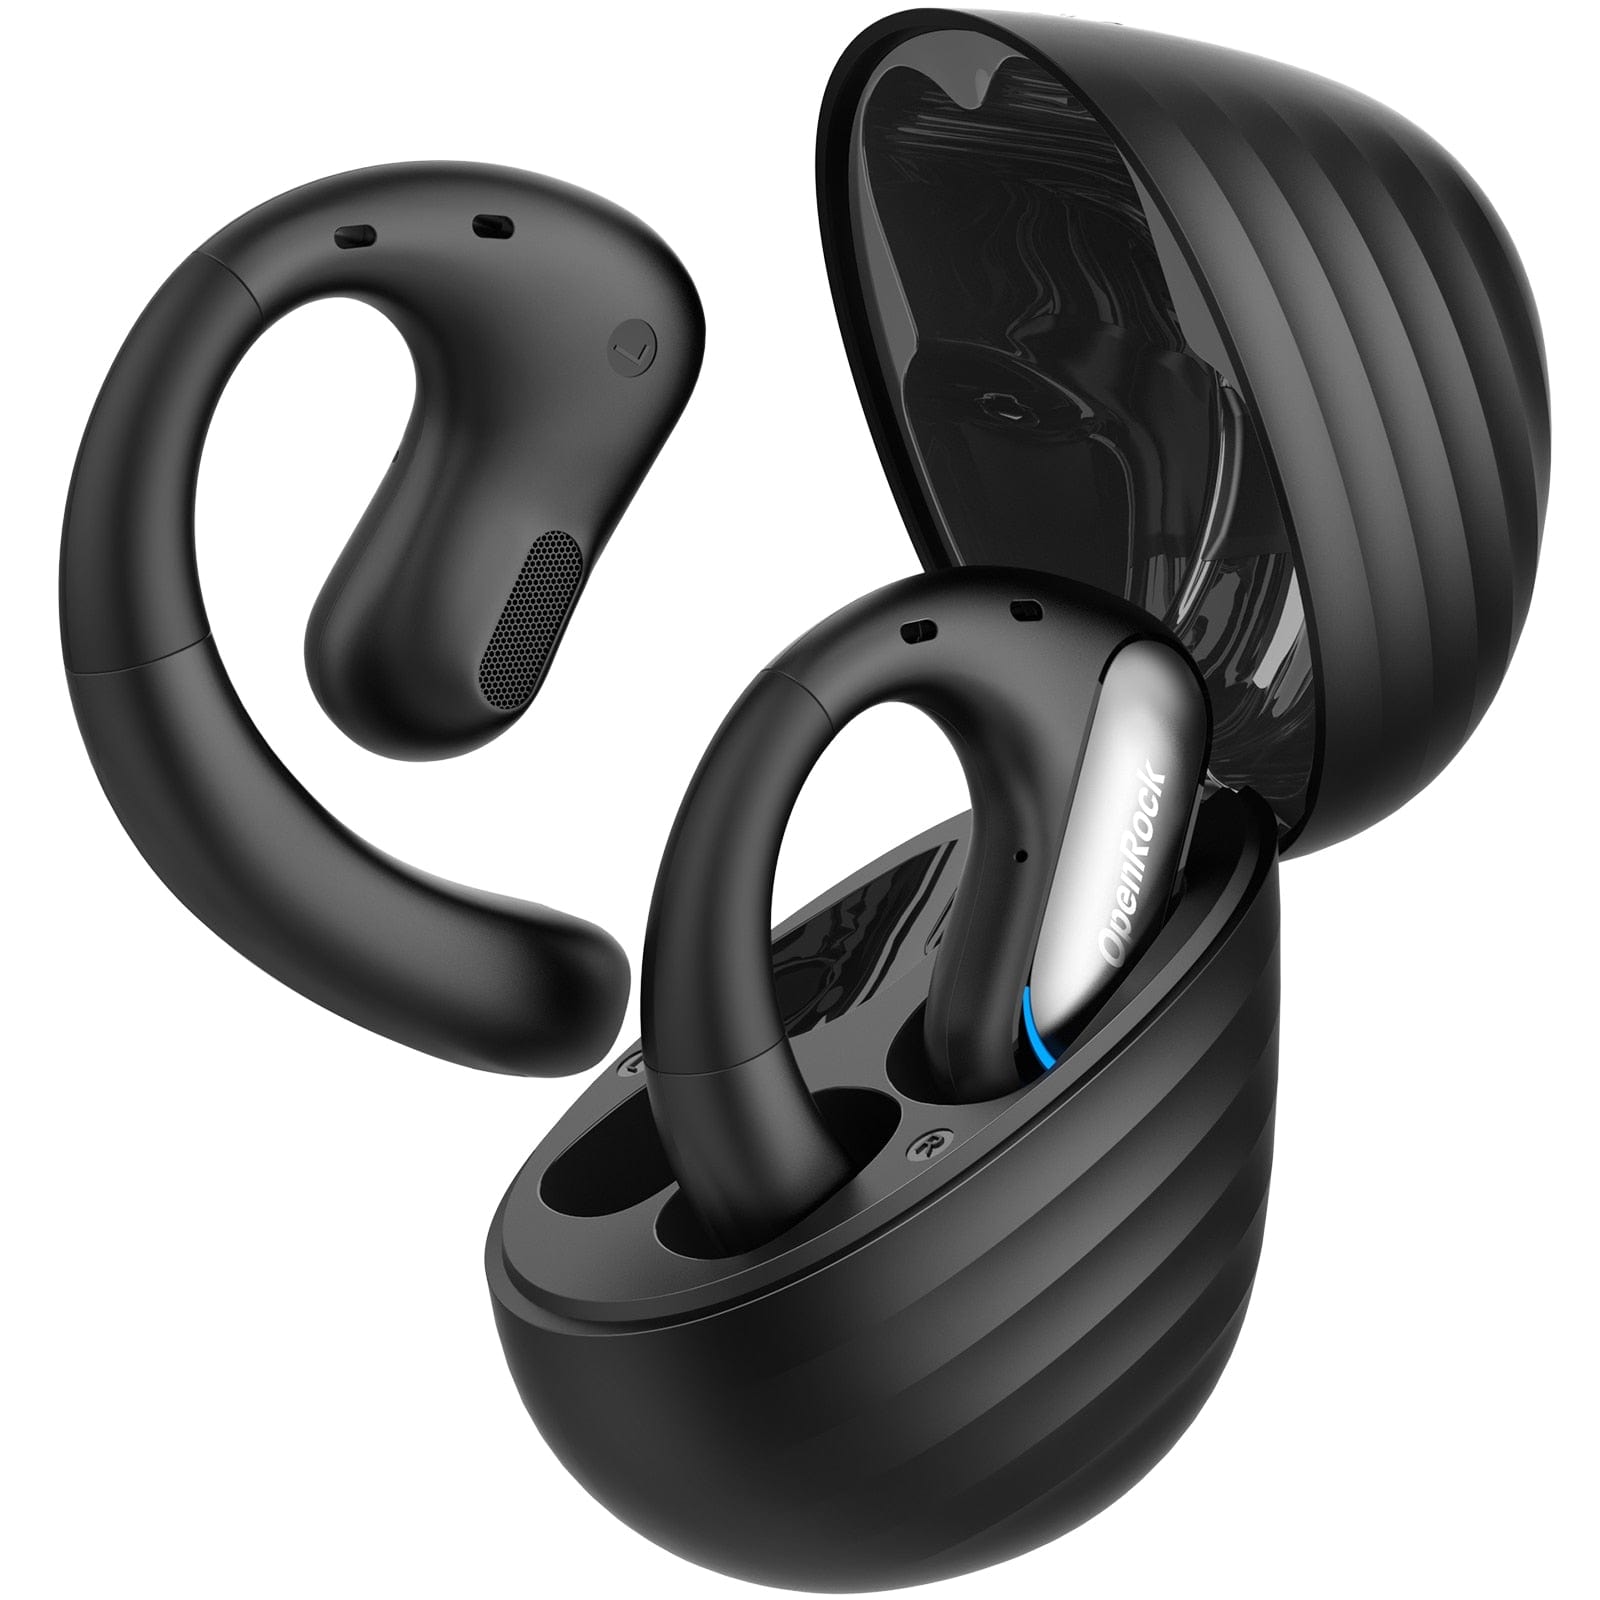 OneOdio OneOdio Wireless headphone In-Ear, Version Pro , Supports Bluetooth 5.2, Playtime up to 46 Hours, Water-Resistant IPX5, Color Black